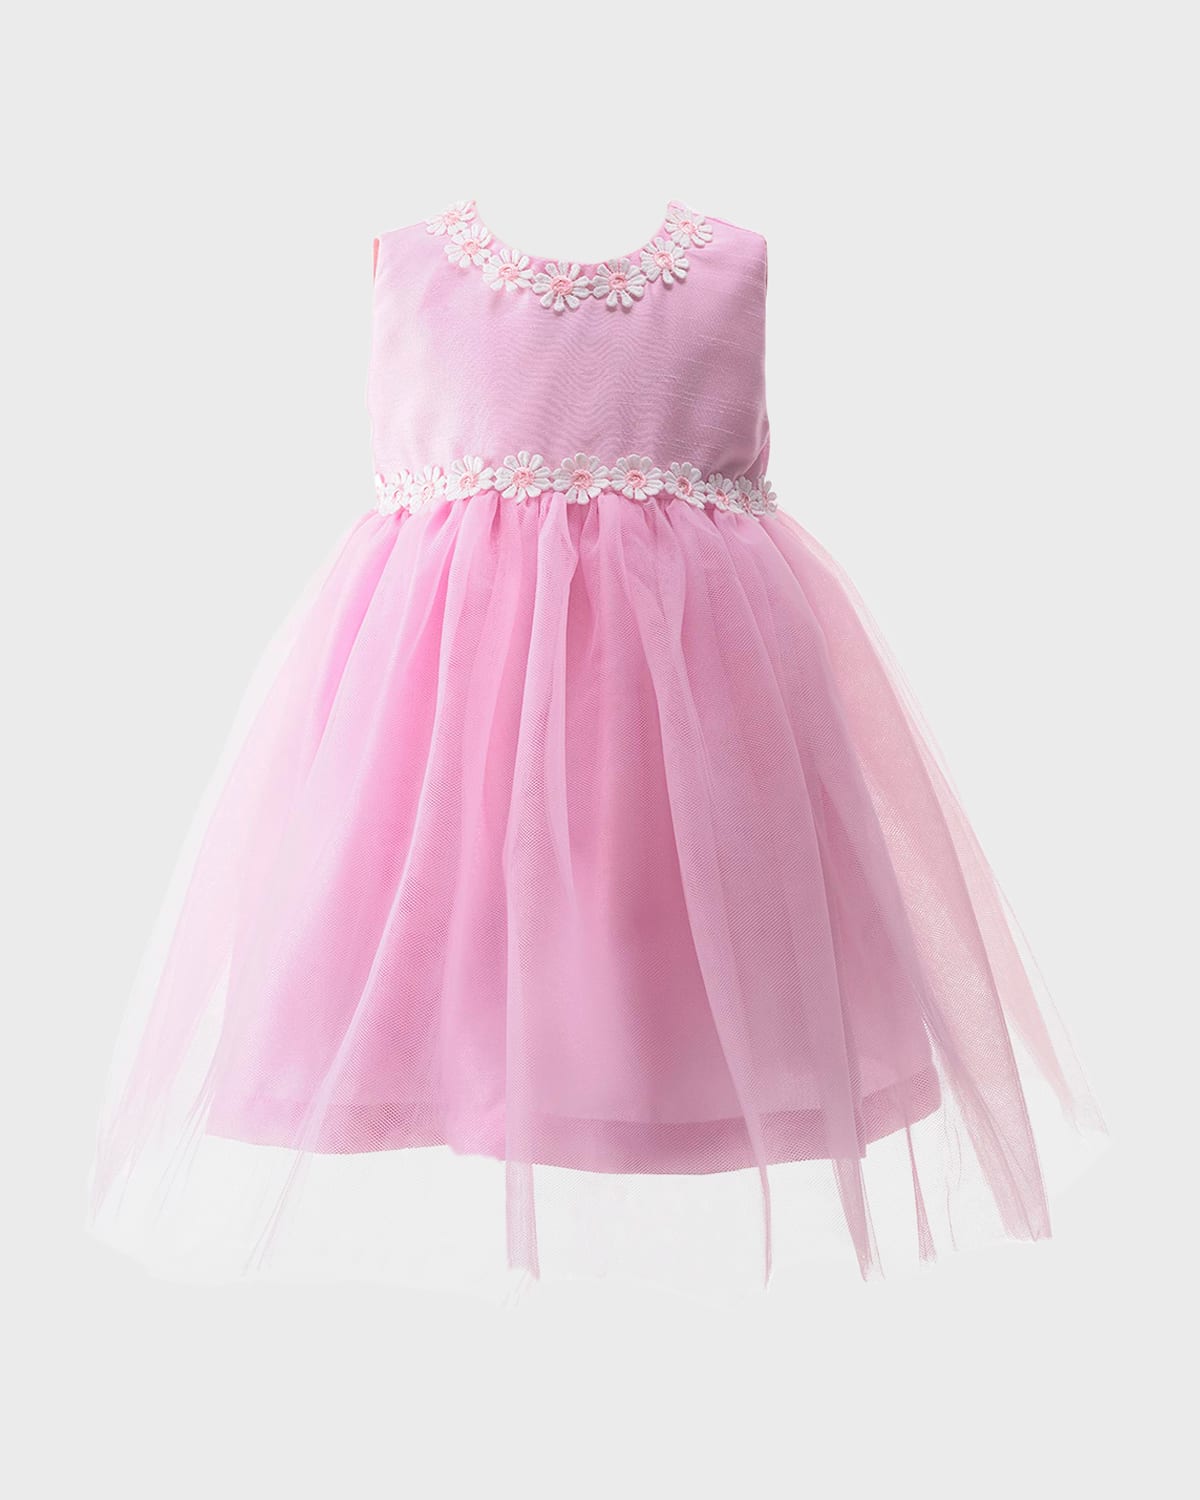 Girl's Daisy Tulle Party Dress, Size 12M-18M